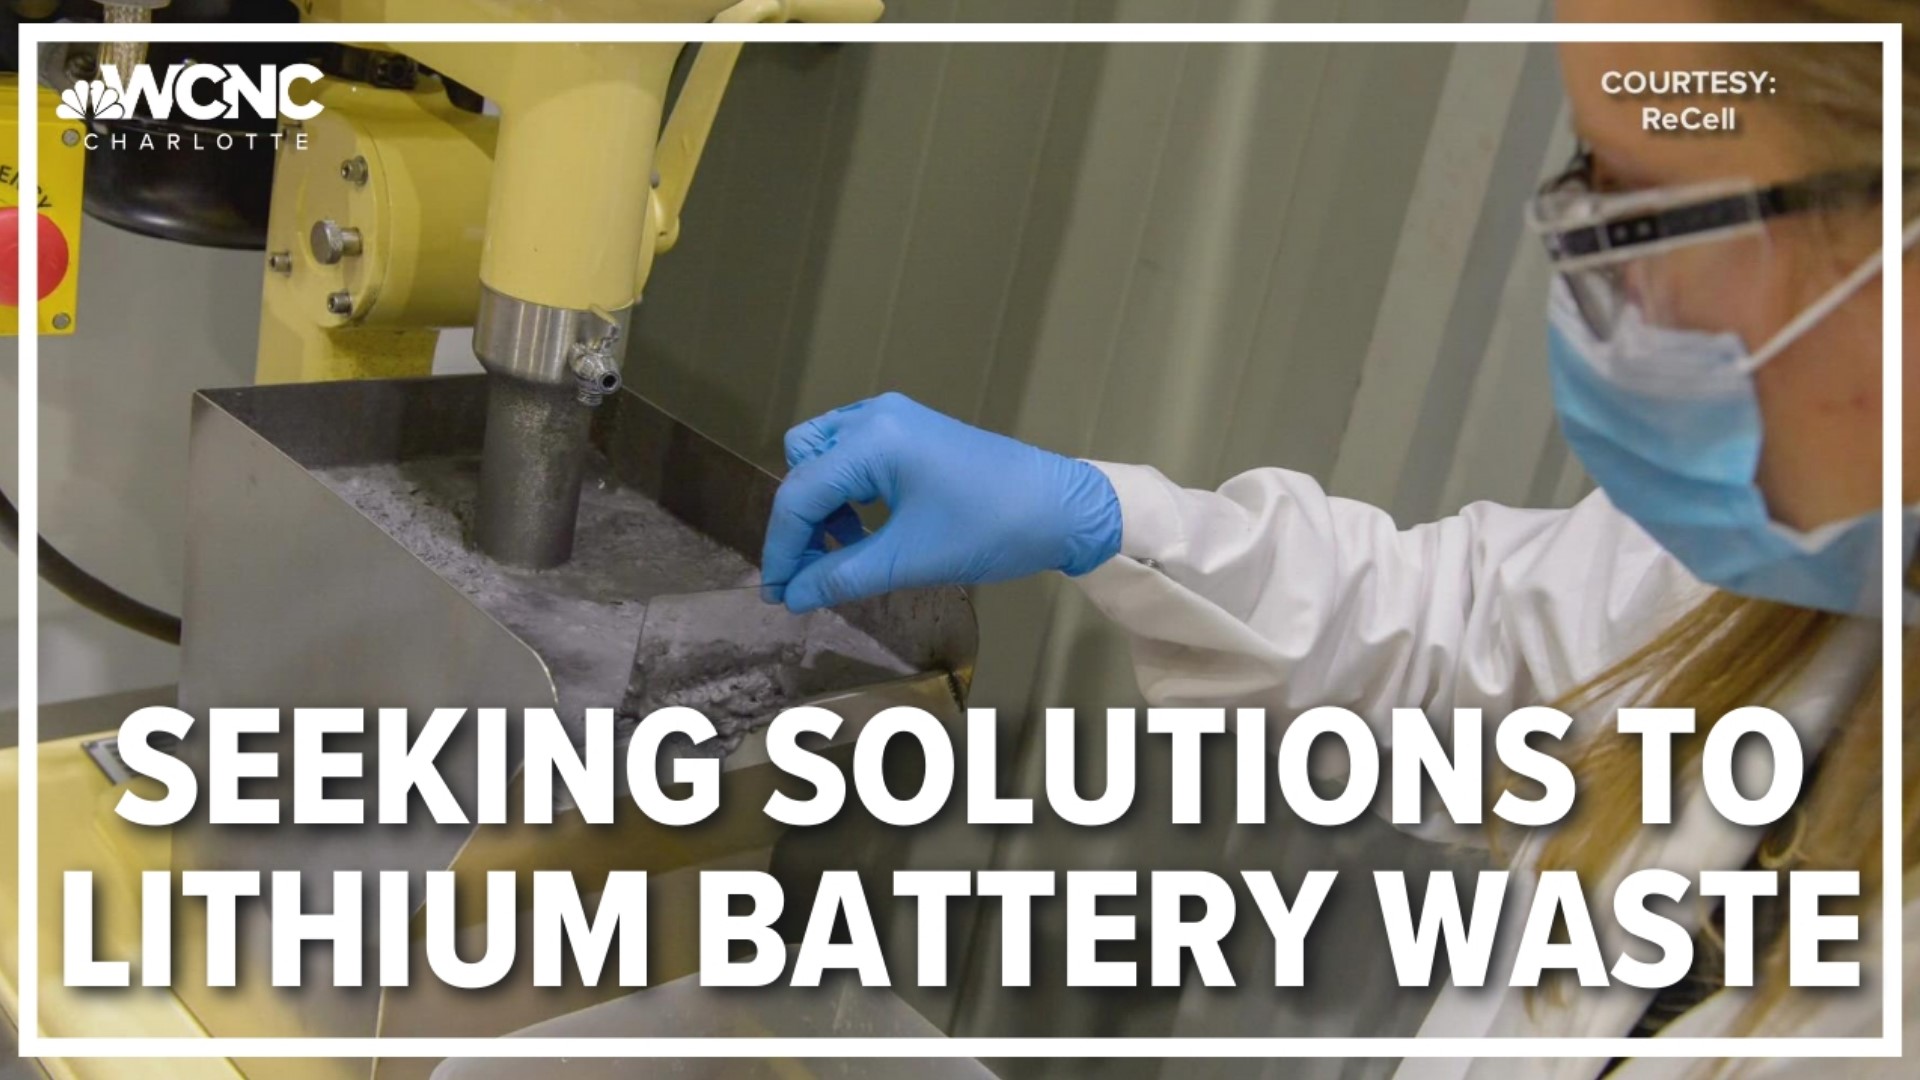 Precious metals like aluminum alloy, nickel, and cobalt are mined to create lithium-ion batteries.